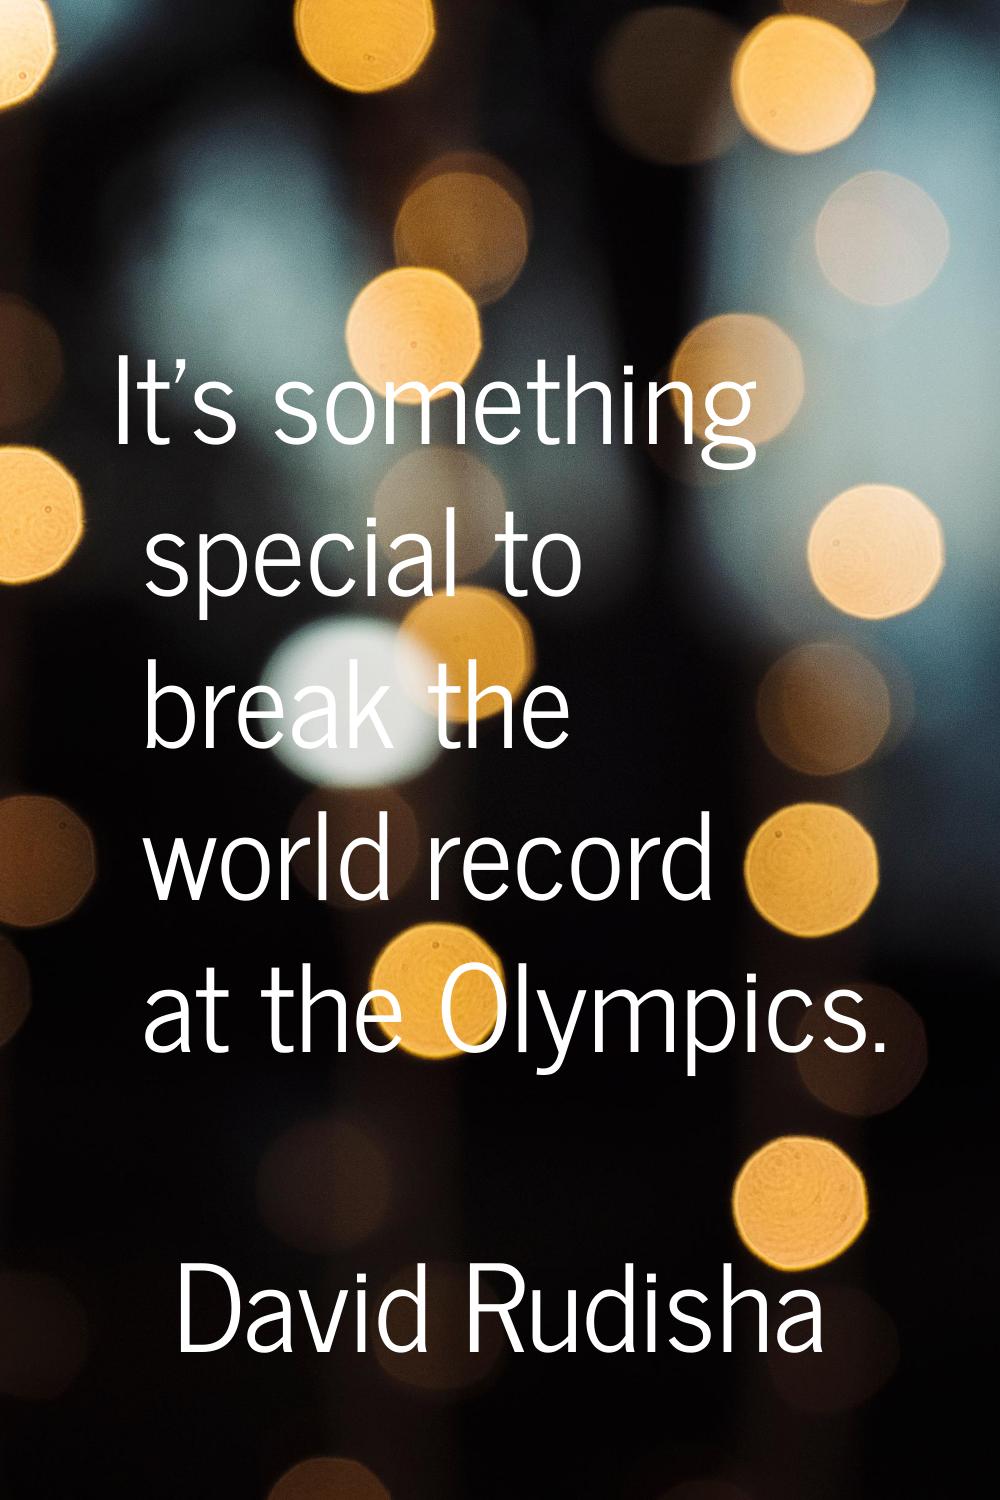 It's something special to break the world record at the Olympics.